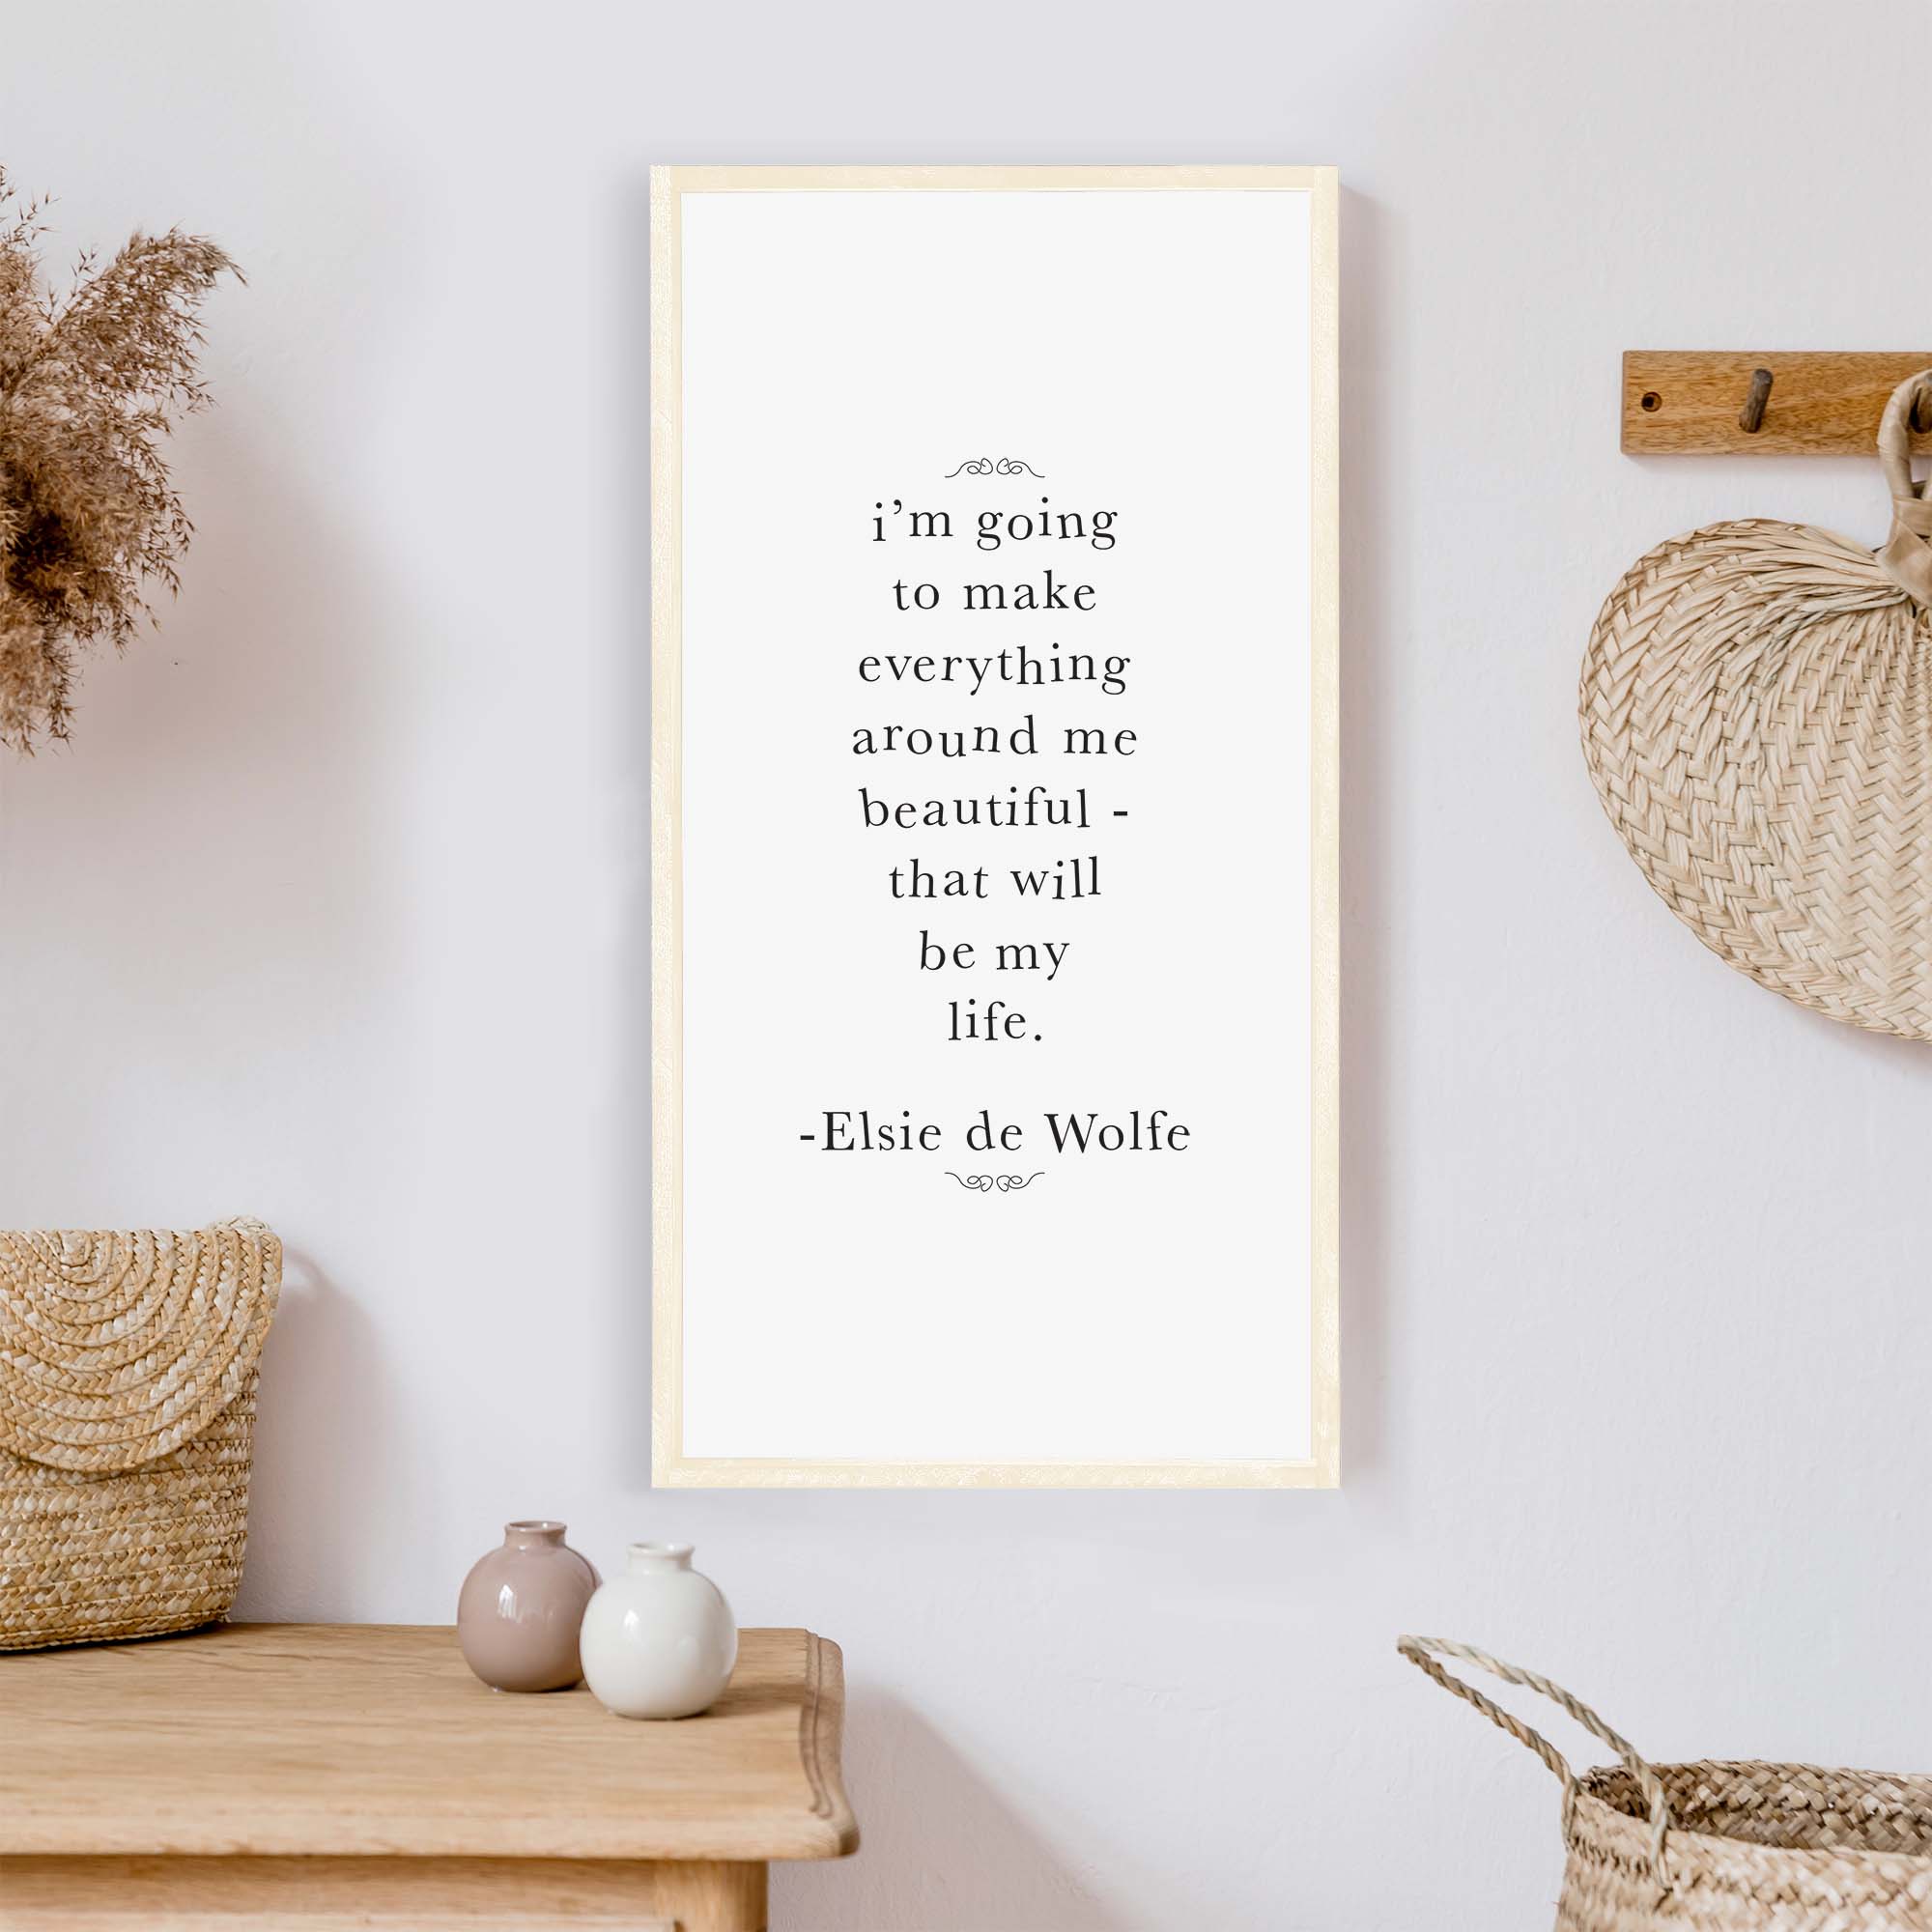 elsie de wolfe quote wood sign hoekstra decor im going to make everything around me beautiful wholesale wood signs